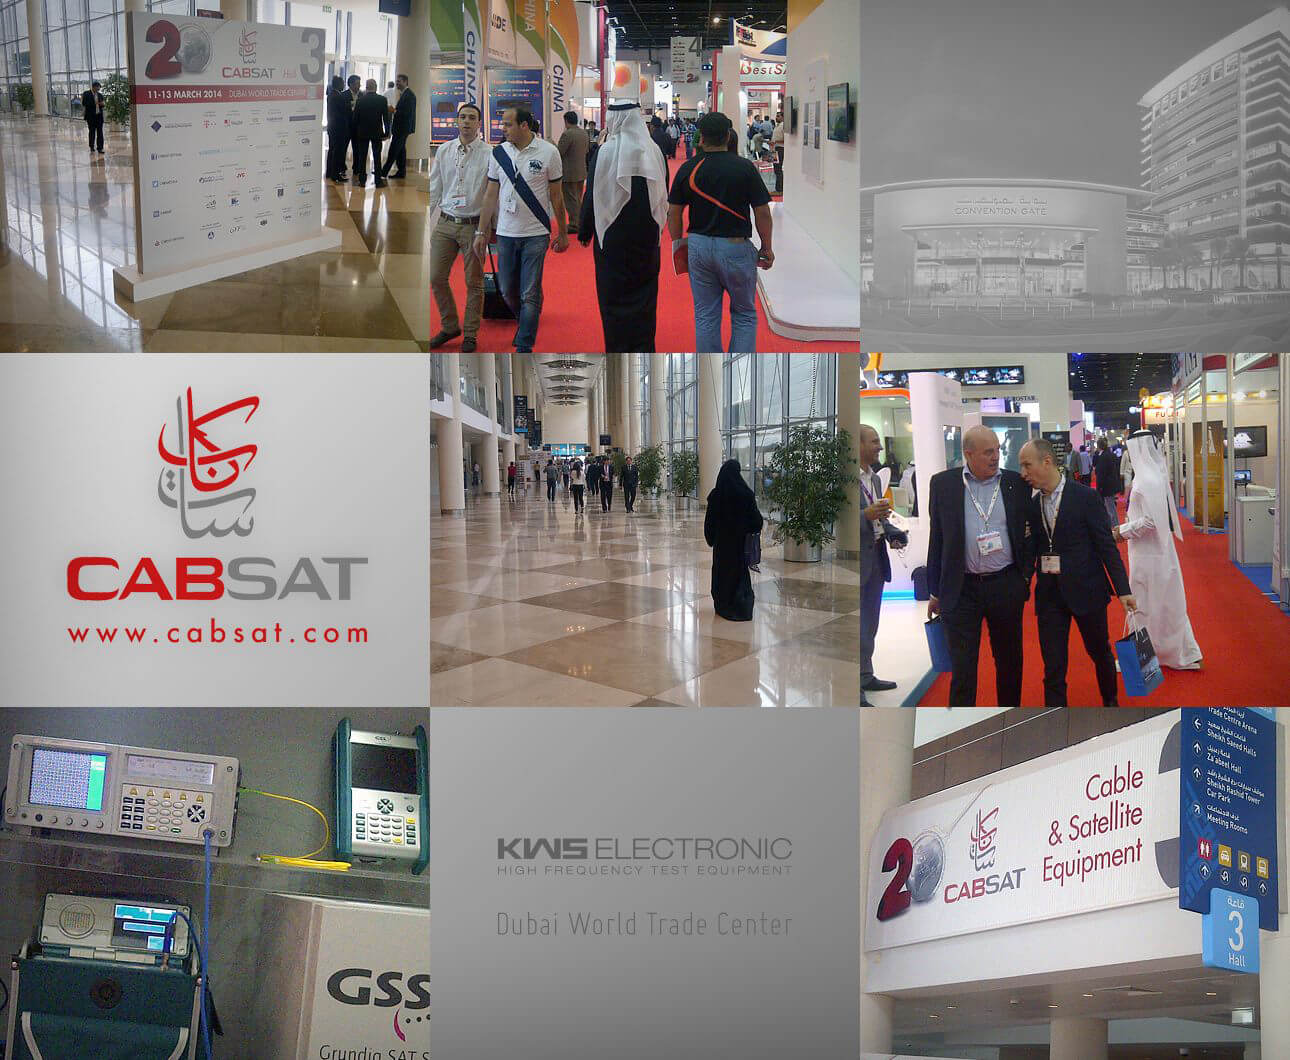 KWS-Electronic: Impressions from CABSAT 2014